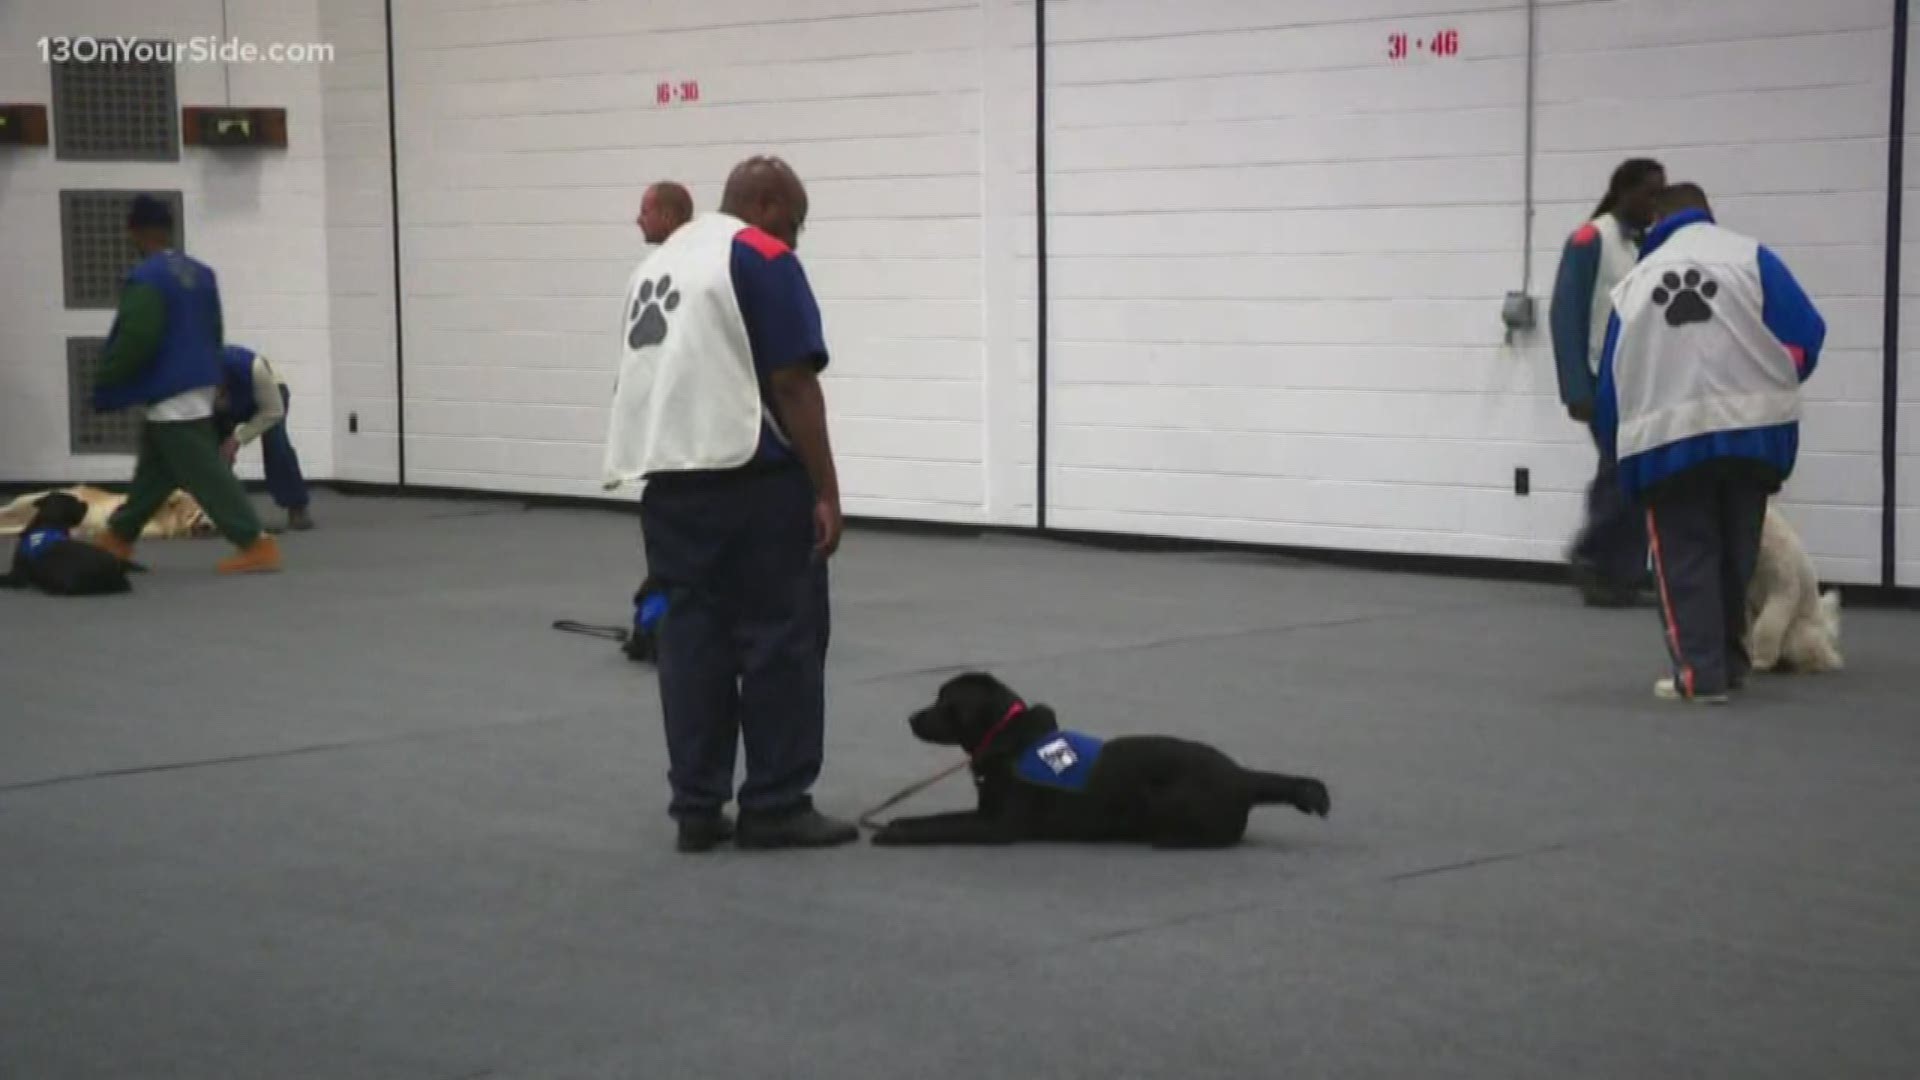 Rae continues her training at the Saginaw Correctional Facility with the Paws Prison Partners Training program.